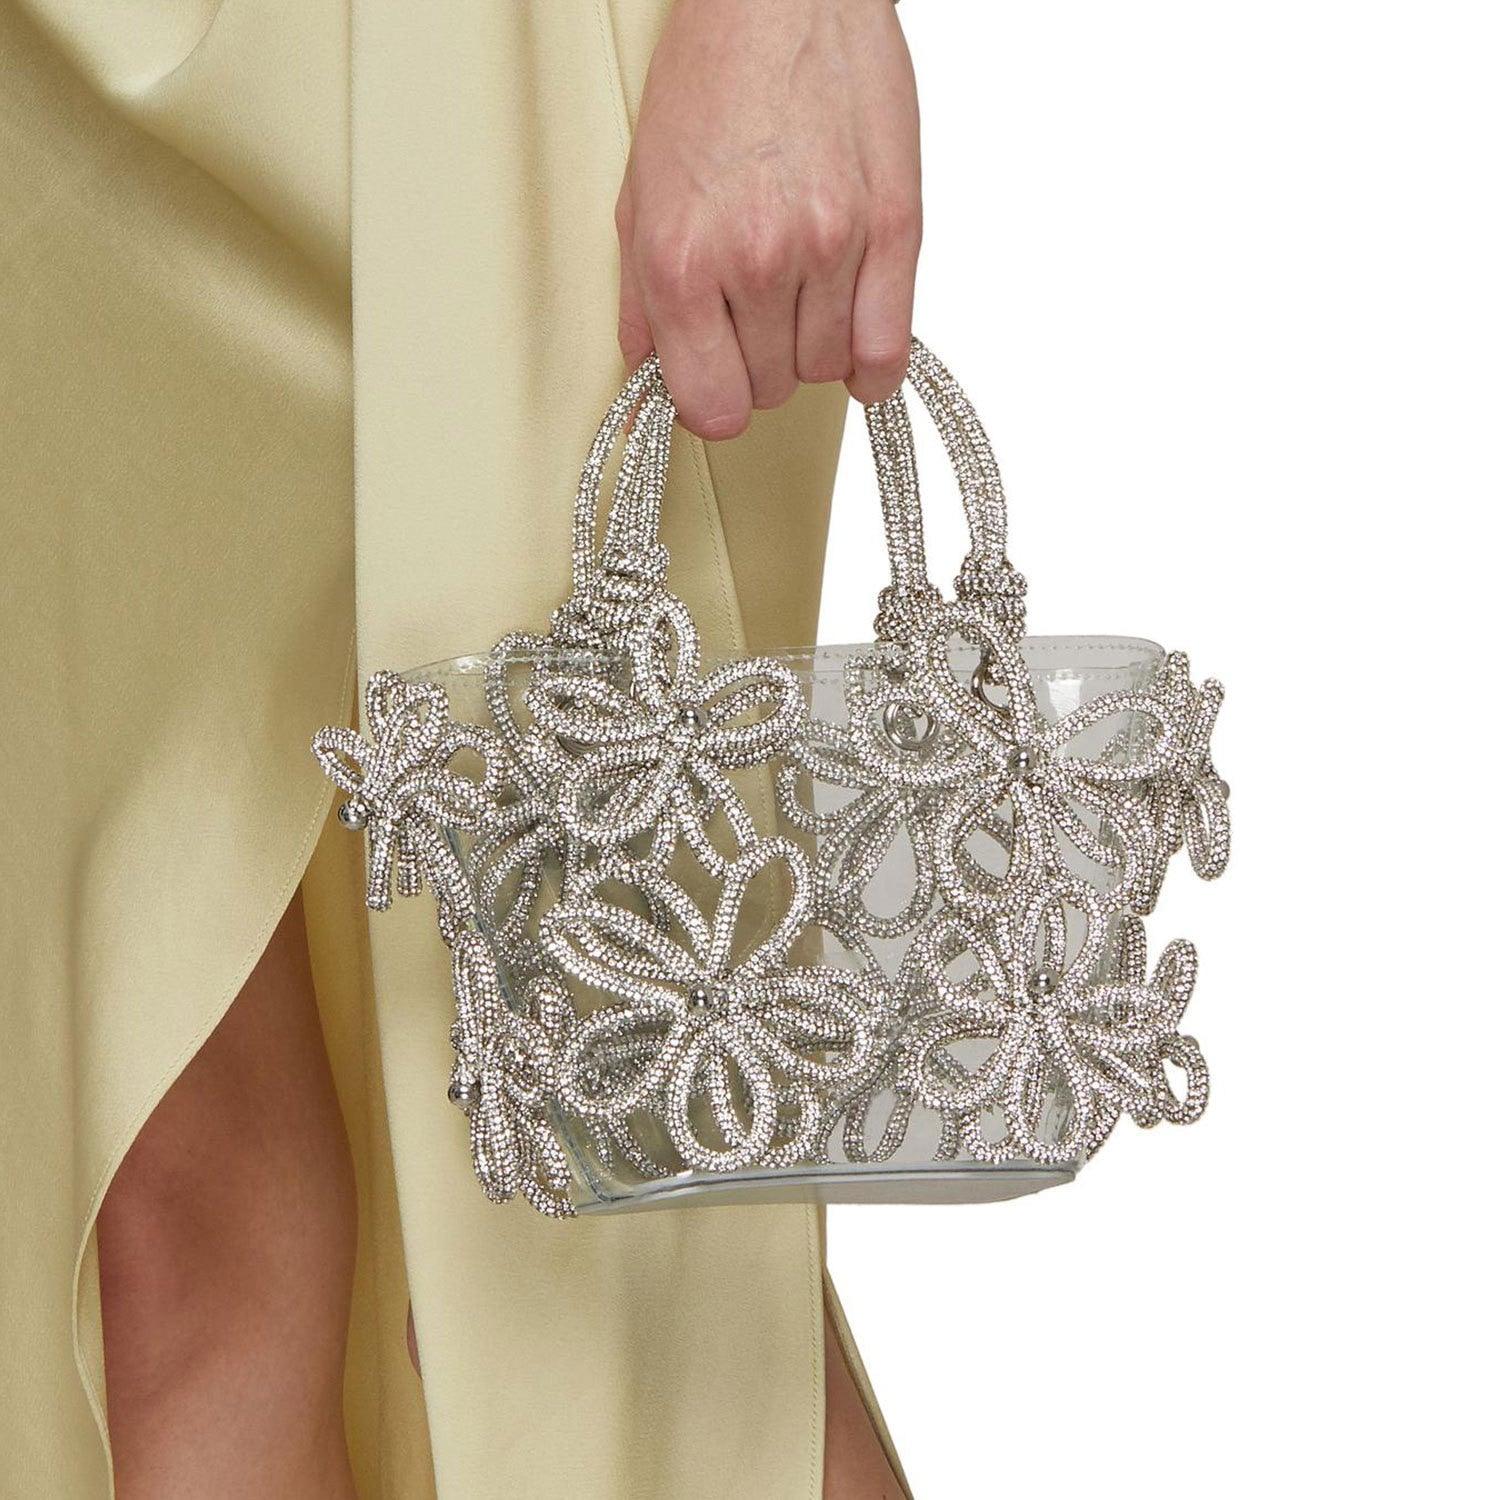 Flower Rhinestone Bag from The House of CO-KY - Handbags